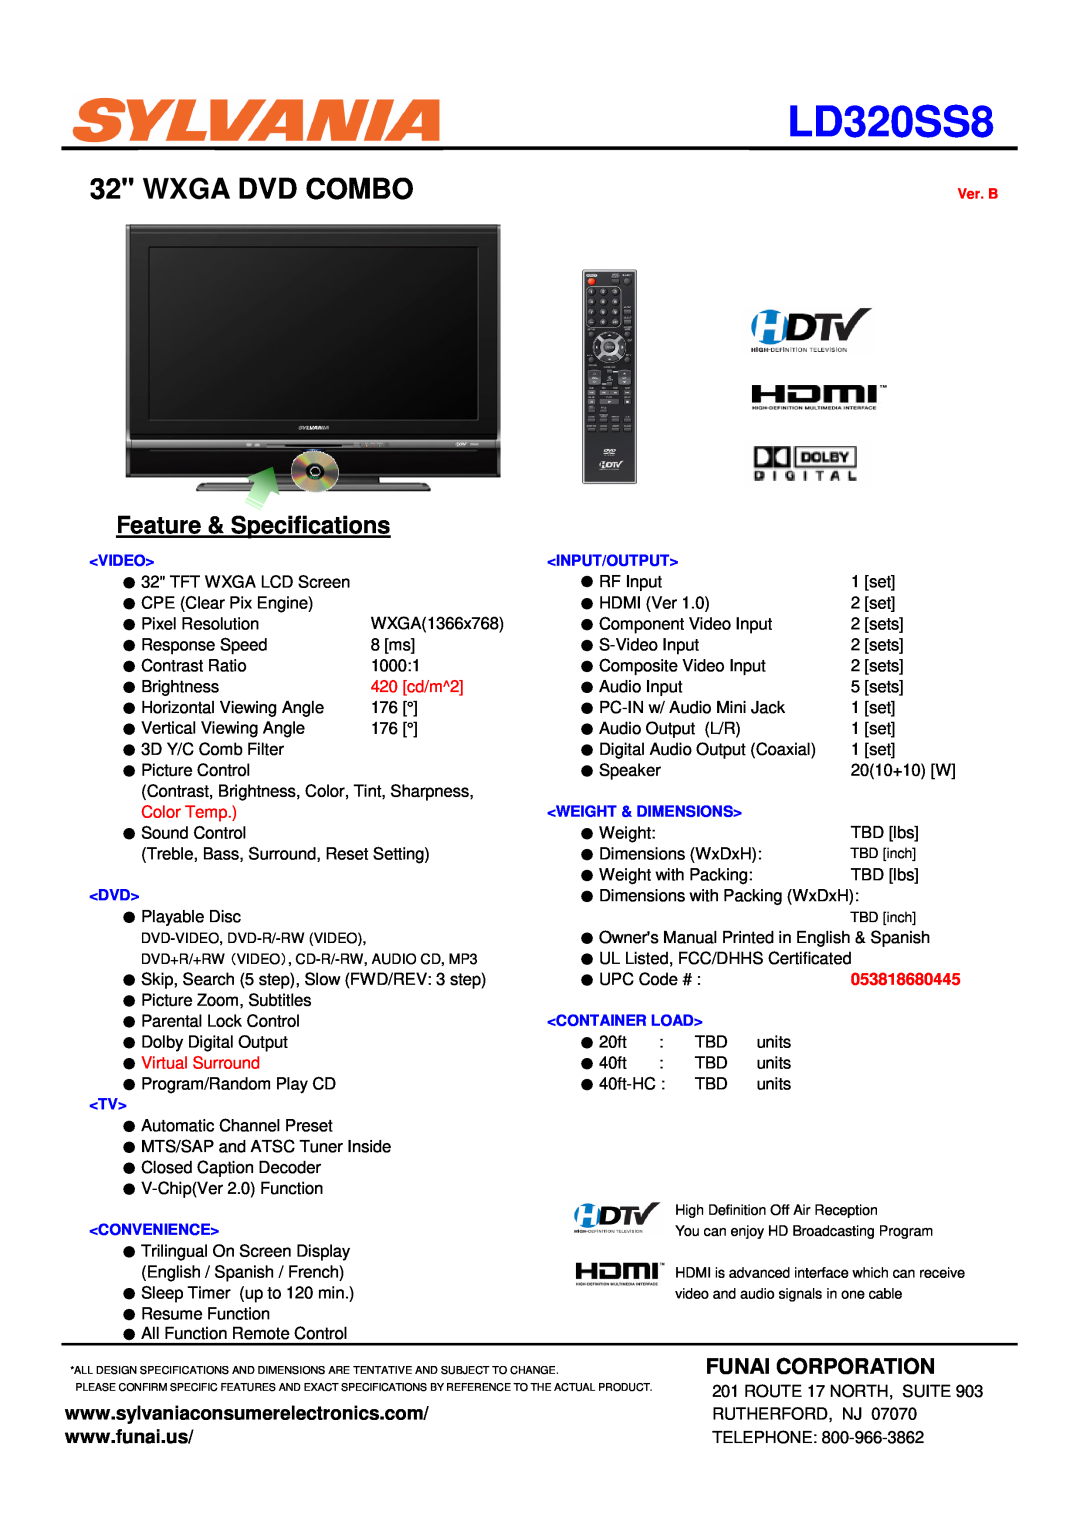 Sylvania LD320SS8 specifications Dvd Combo, Feature & Specifications, Funai Corporation, 053818680445 